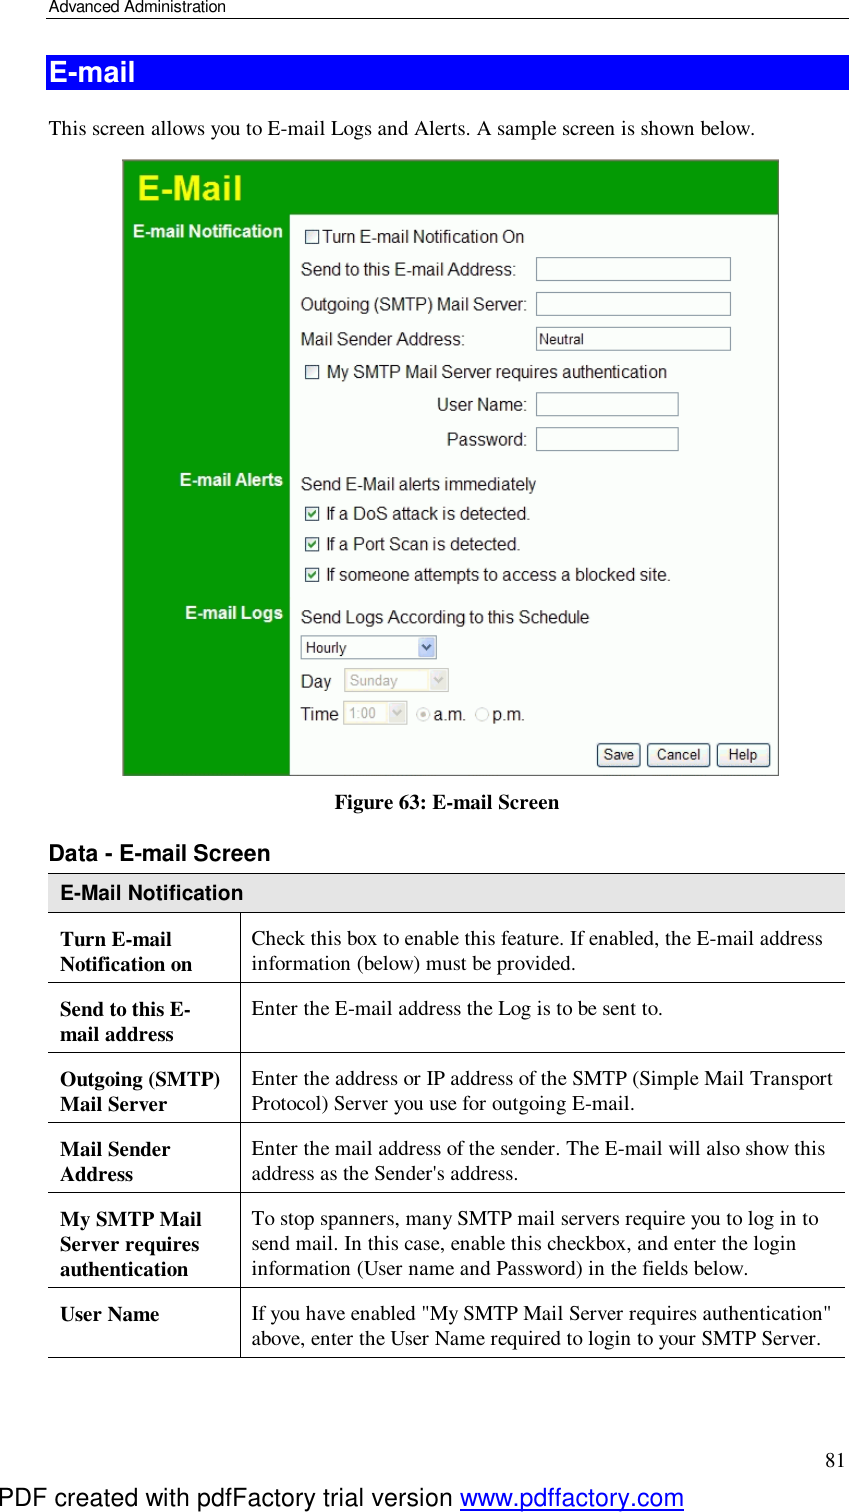 Advanced Administration 81 E-mail This screen allows you to E-mail Logs and Alerts. A sample screen is shown below.  Figure 63: E-mail Screen Data - E-mail Screen E-Mail Notification Turn E-mail Notification on  Check this box to enable this feature. If enabled, the E-mail address information (below) must be provided. Send to this E-mail address  Enter the E-mail address the Log is to be sent to.  Outgoing (SMTP) Mail Server  Enter the address or IP address of the SMTP (Simple Mail Transport Protocol) Server you use for outgoing E-mail. Mail Sender Address  Enter the mail address of the sender. The E-mail will also show this address as the Sender&apos;s address. My SMTP Mail Server requires authentication To stop spanners, many SMTP mail servers require you to log in to send mail. In this case, enable this checkbox, and enter the login information (User name and Password) in the fields below. User Name  If you have enabled &quot;My SMTP Mail Server requires authentication&quot; above, enter the User Name required to login to your SMTP Server. PDF created with pdfFactory trial version www.pdffactory.com